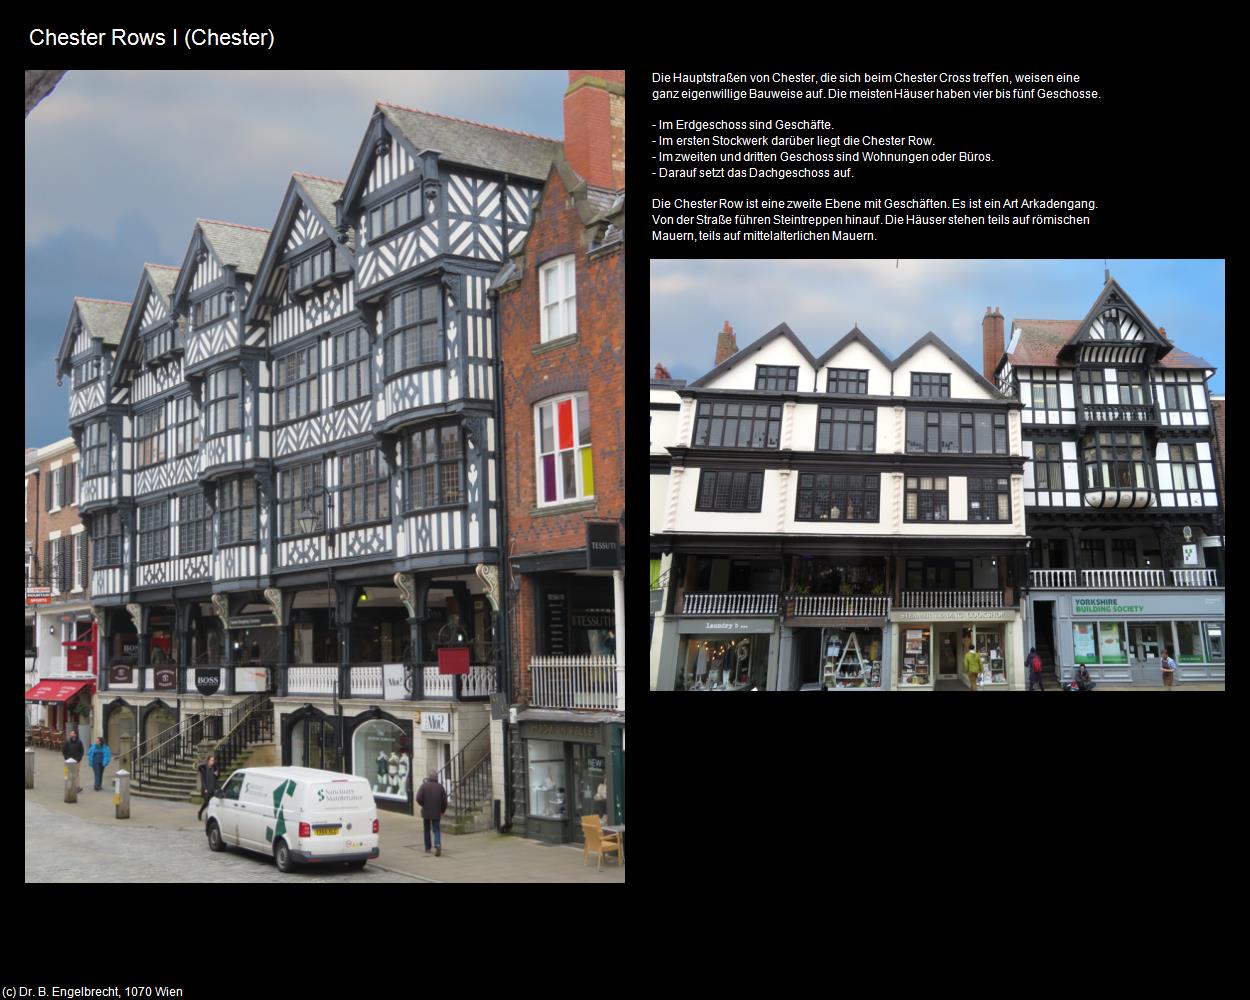 Chester Rows I  (Chester, England) in Kulturatlas-ENGLAND und WALES